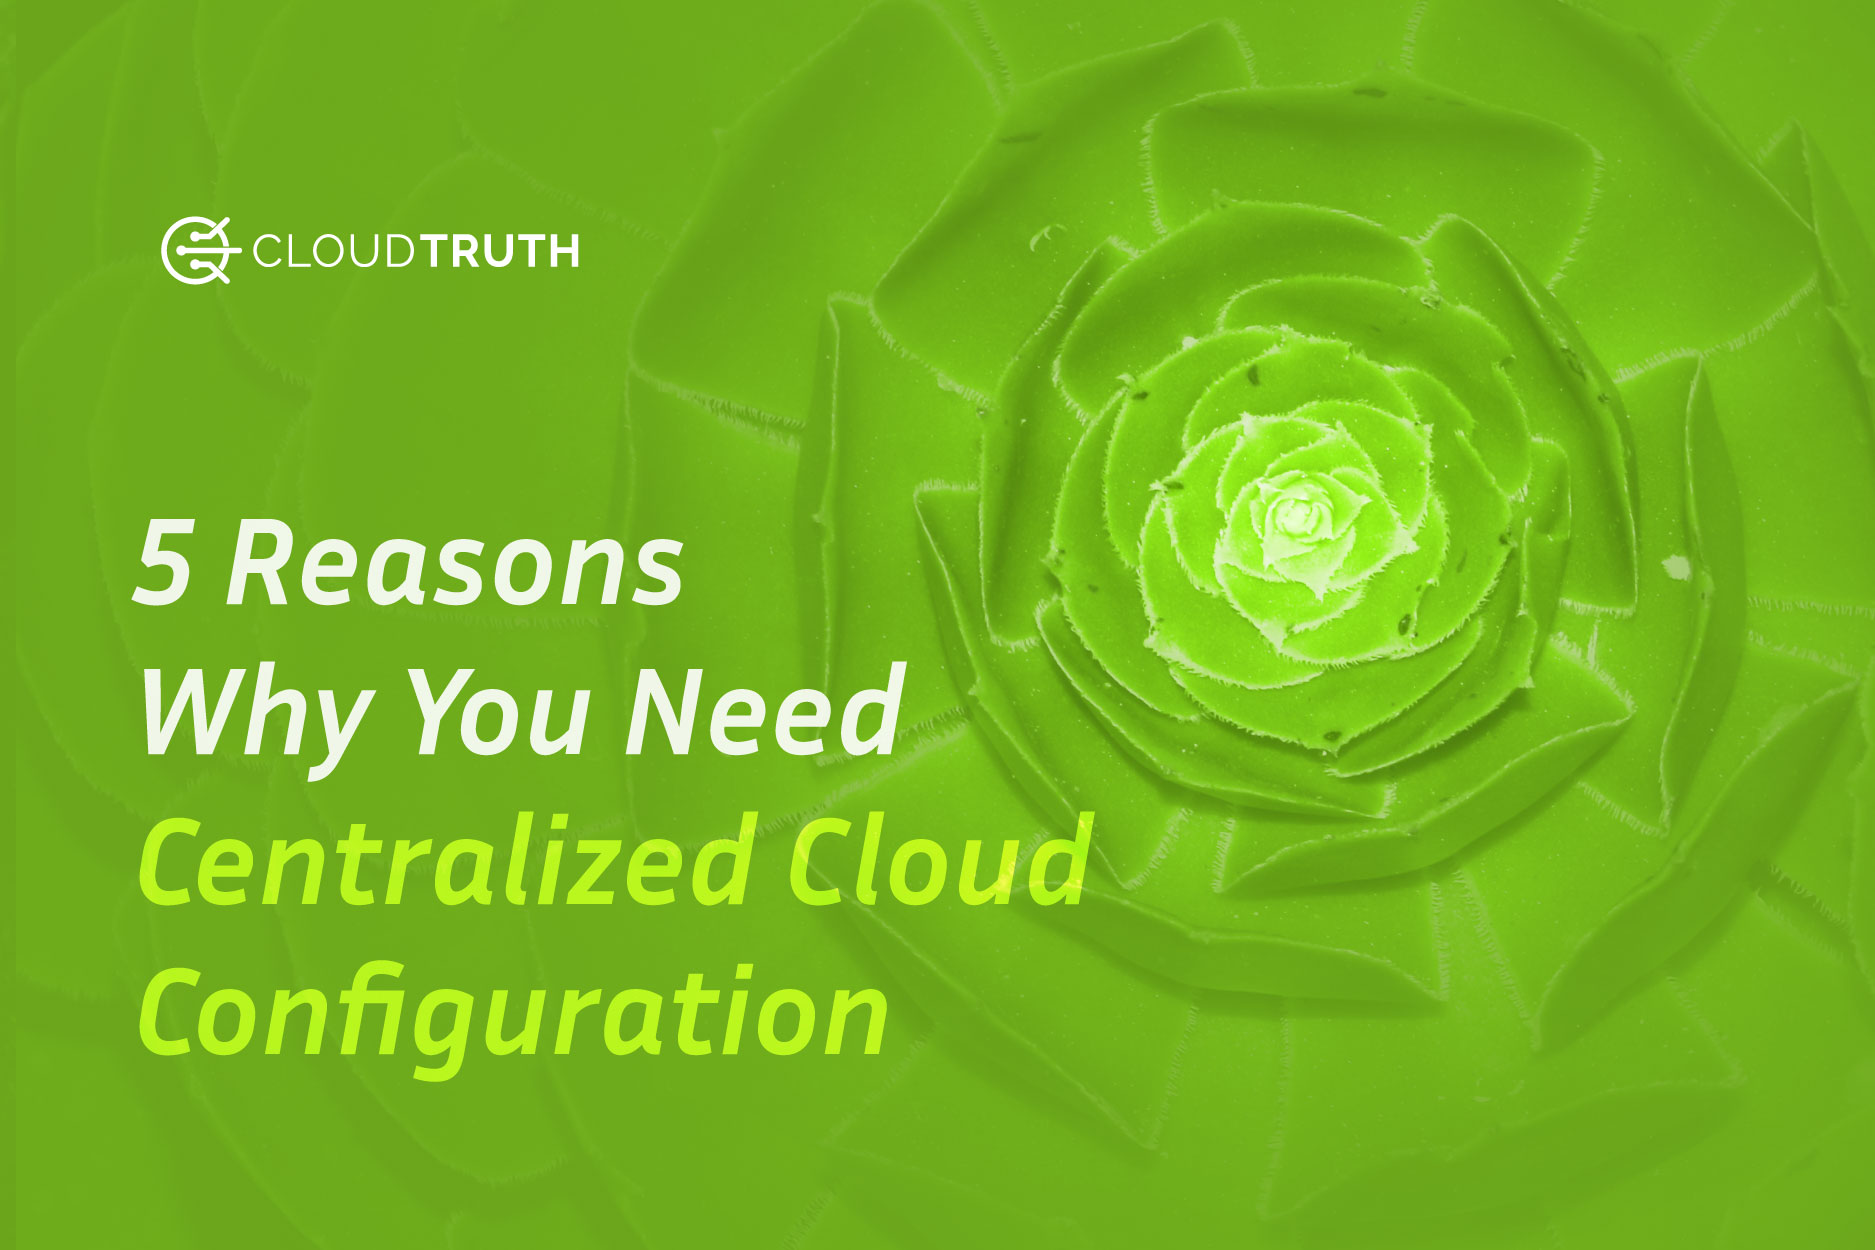 5 Reasons Why You Need Centralized Cloud Configuration